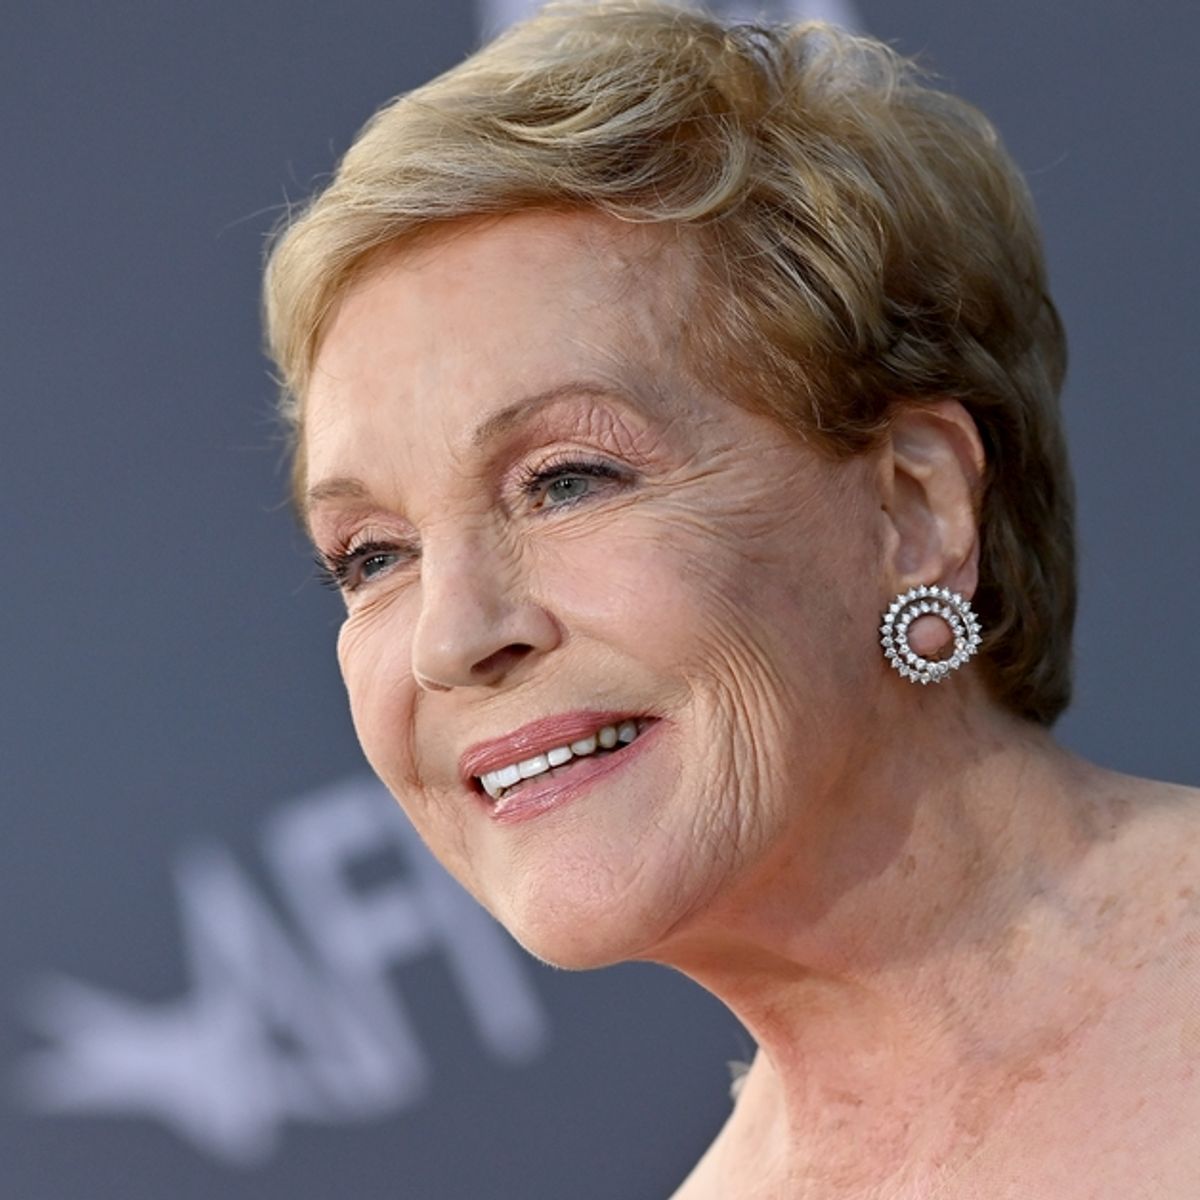 Did Julie Andrews Sing a Parody of 'My Favorite Things' to Celebrate Her  69th Birthday? 